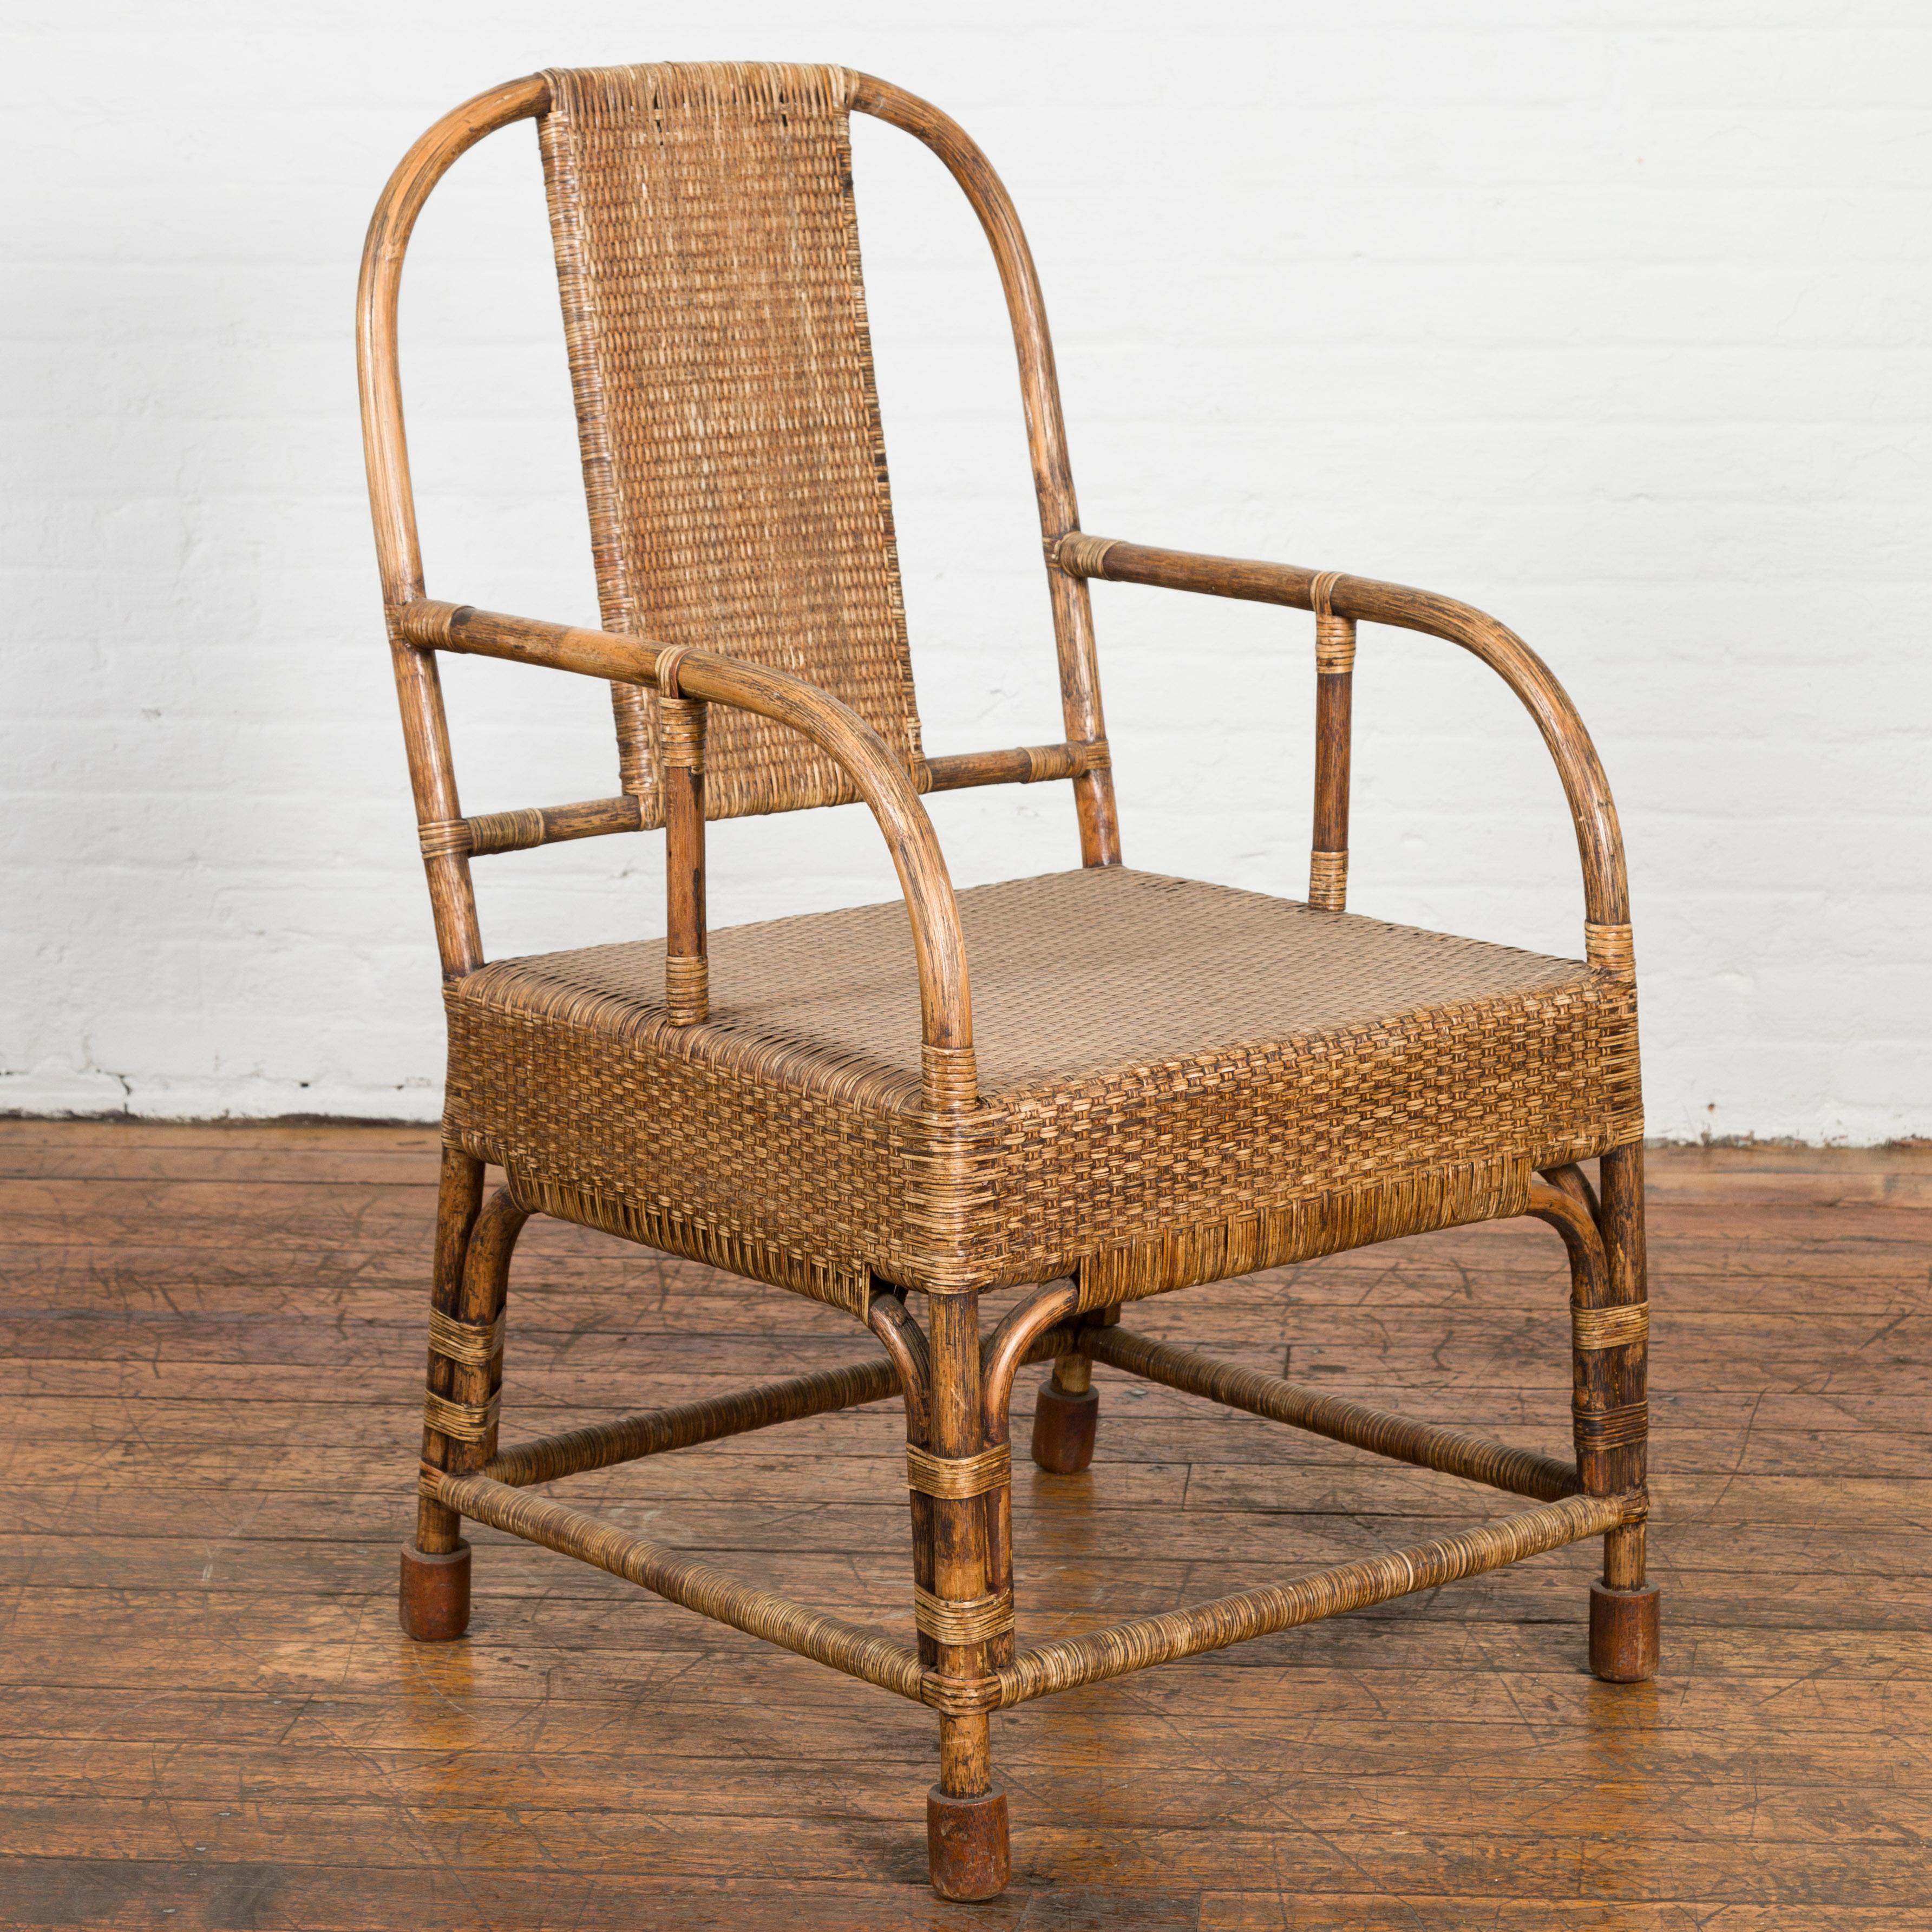 A vintage Burmese country style hand woven rattan and bamboo armchair from the mid-20th Century, with rounded open back, looping arms and side stretchers. Created in Burma during the Midcentury period, this country style bamboo armchair attracts the